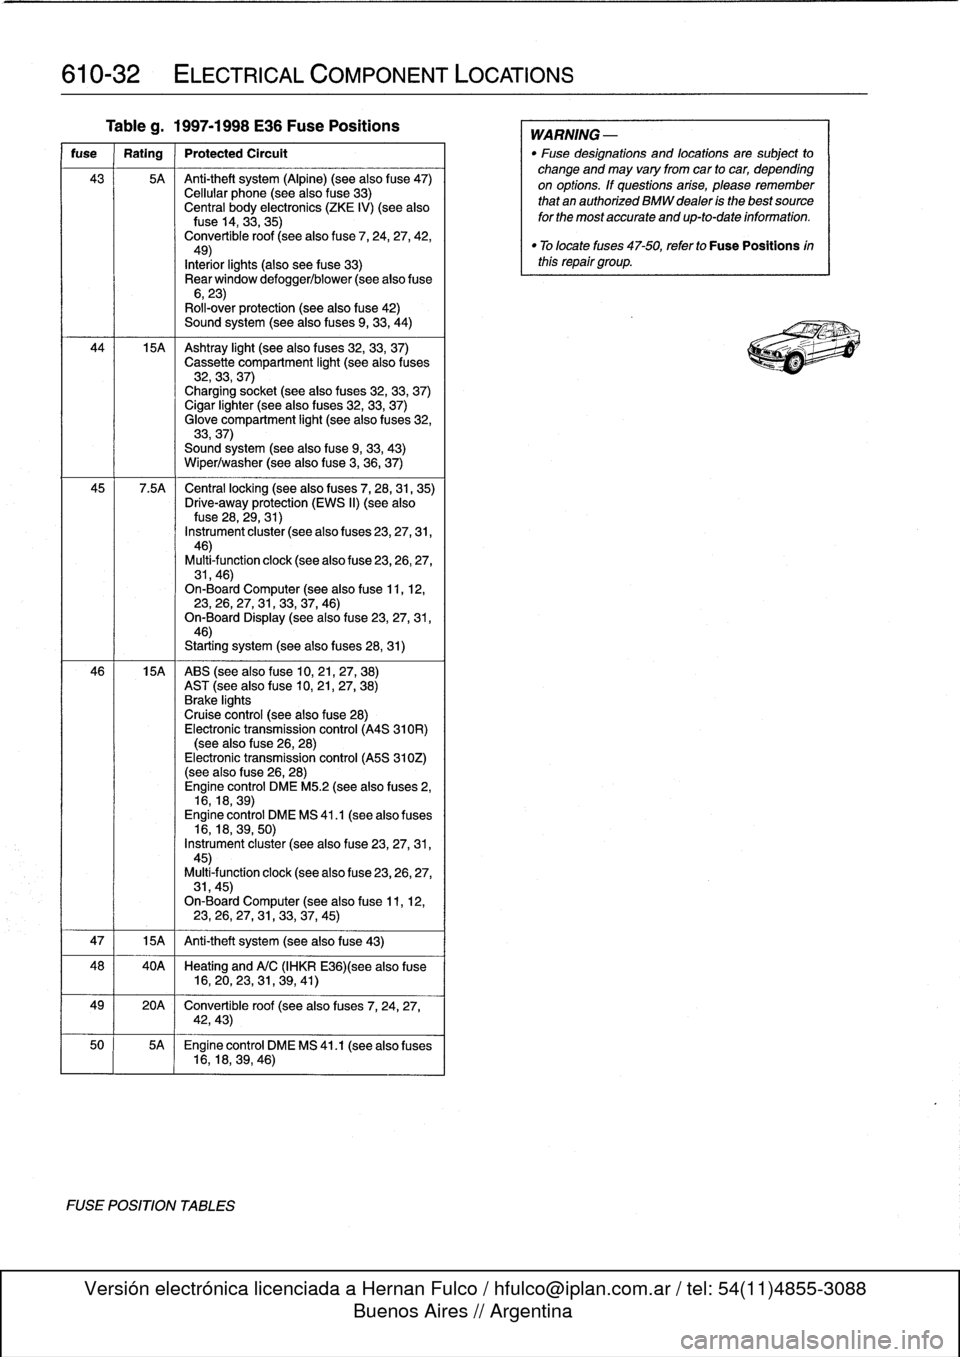 BMW 325i 1994 E36 Workshop Manual 
610-32

	

ELECTRICAL
COMPONENT
LOCATIONS

Tableg
.
1997-1998
E36
Fuse
Positions

fuse

	

Rating

	

Protected
Circult

43

	

5A

	

Anti-theft
system
(Alpine)
(see
also
f
use47)
Cellular
phone
(se